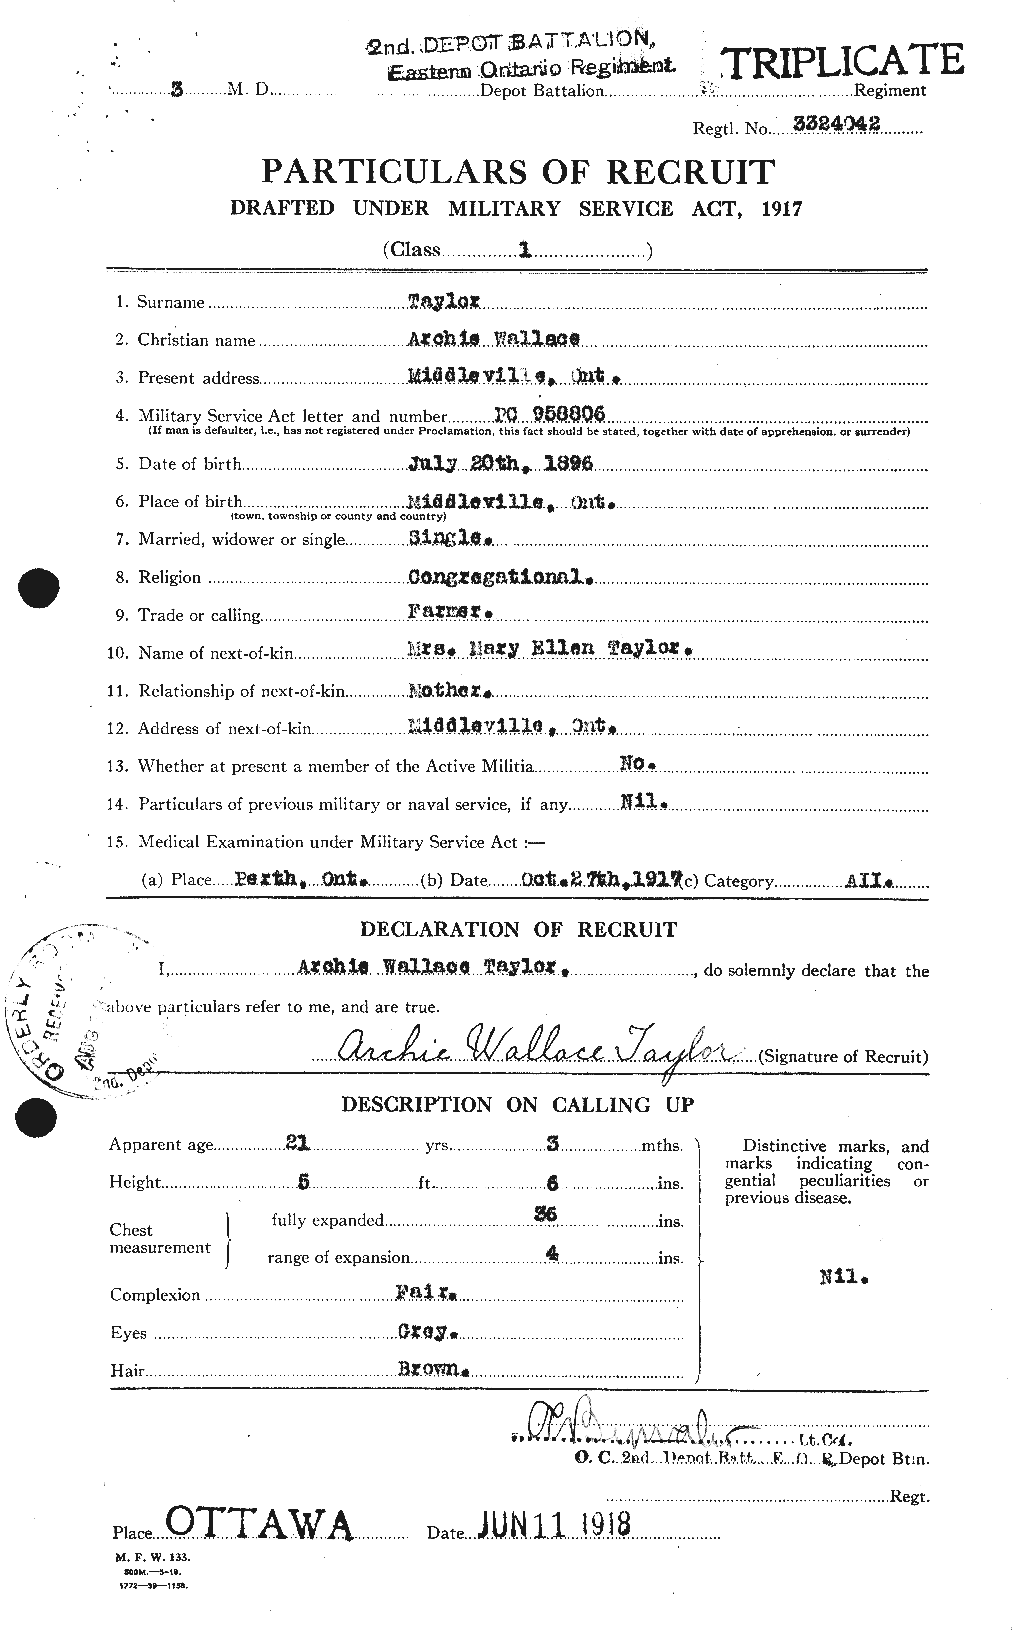 Personnel Records of the First World War - CEF 626248a